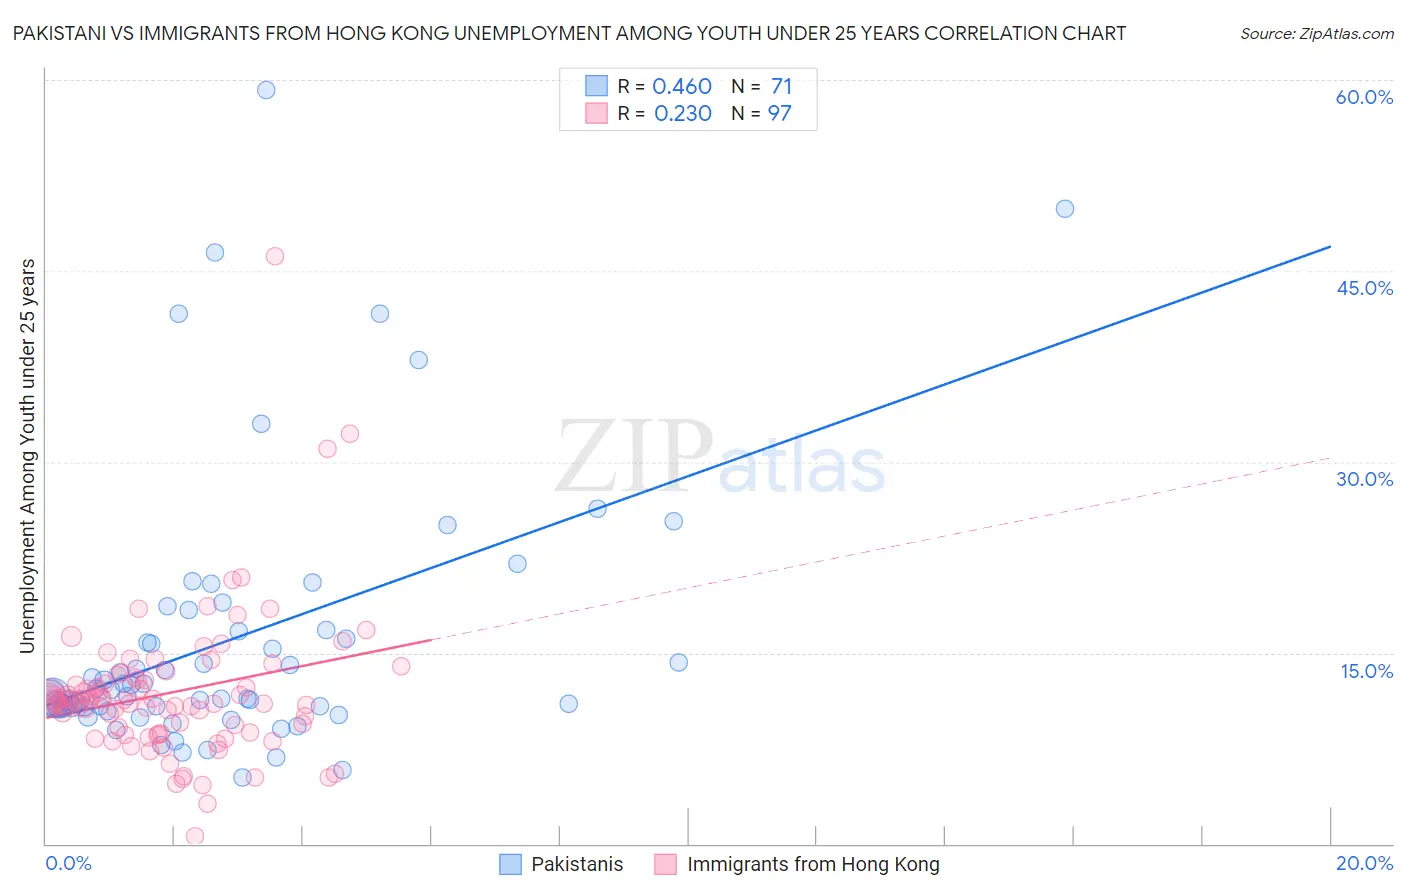 Pakistani vs Immigrants from Hong Kong Unemployment Among Youth under 25 years